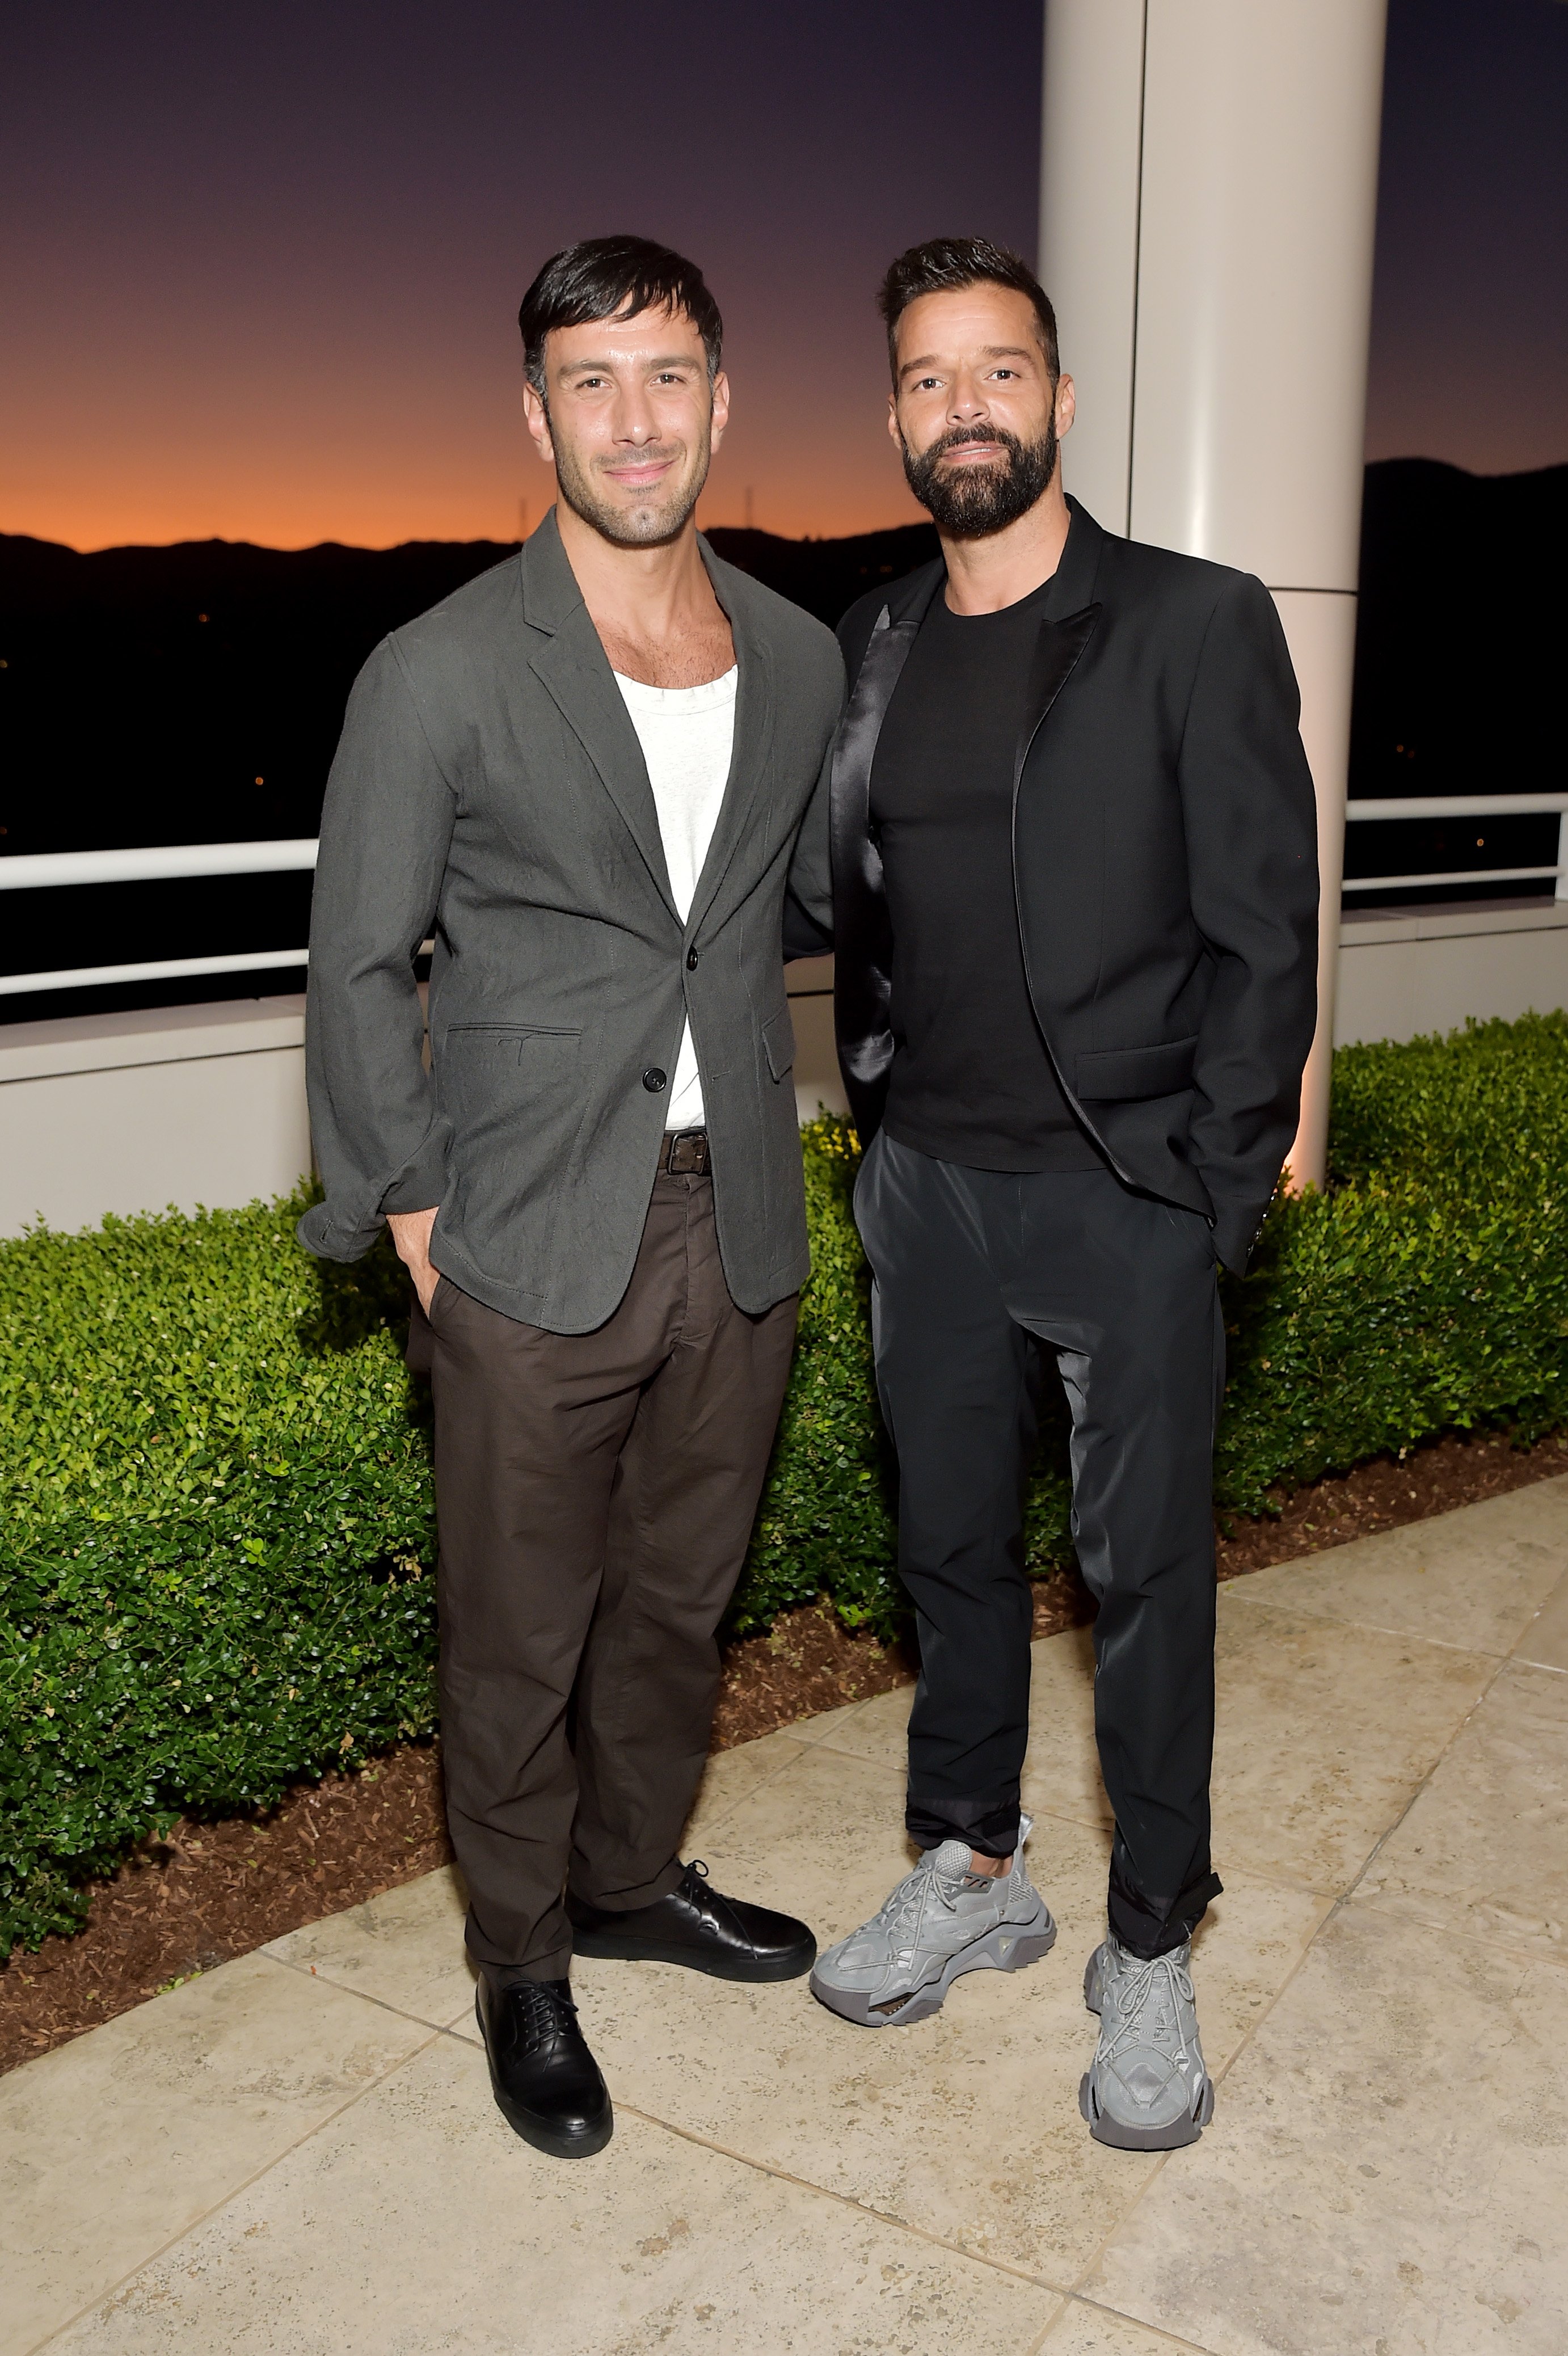 Jwan Yosef and Ricky Martin on September 16, 2019 in Los Angeles, California. | Source: Getty Images